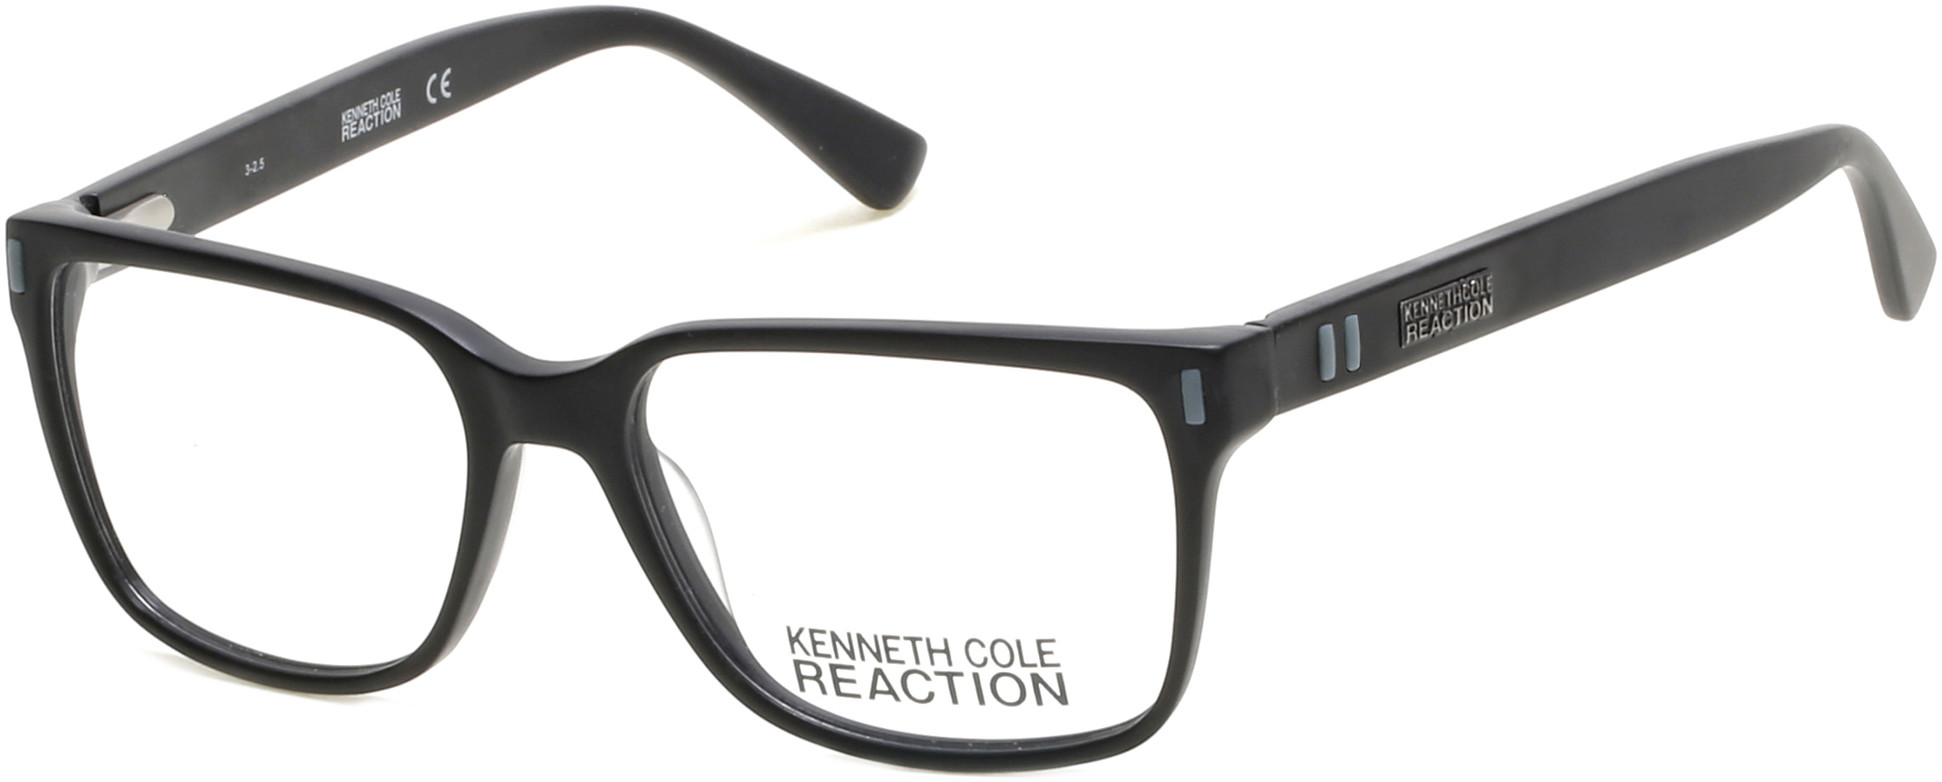 KENNETH COLE NY 0786 002